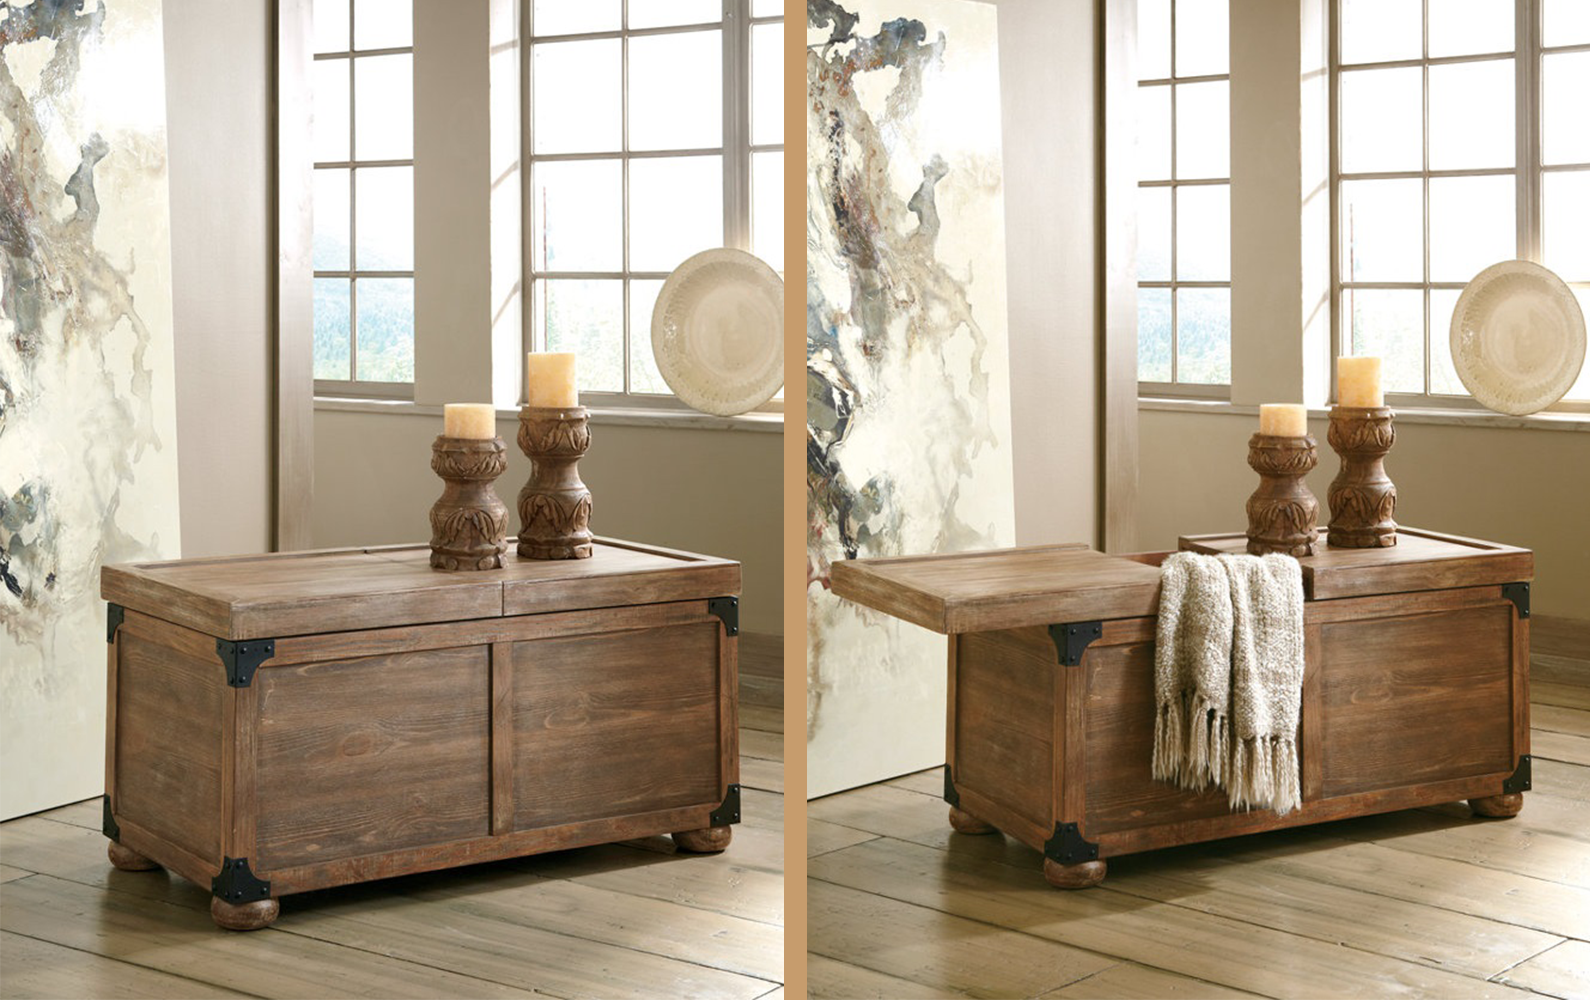 Rustic farmhouse coffee table with storage shown with storage tops closed and shown with it open.